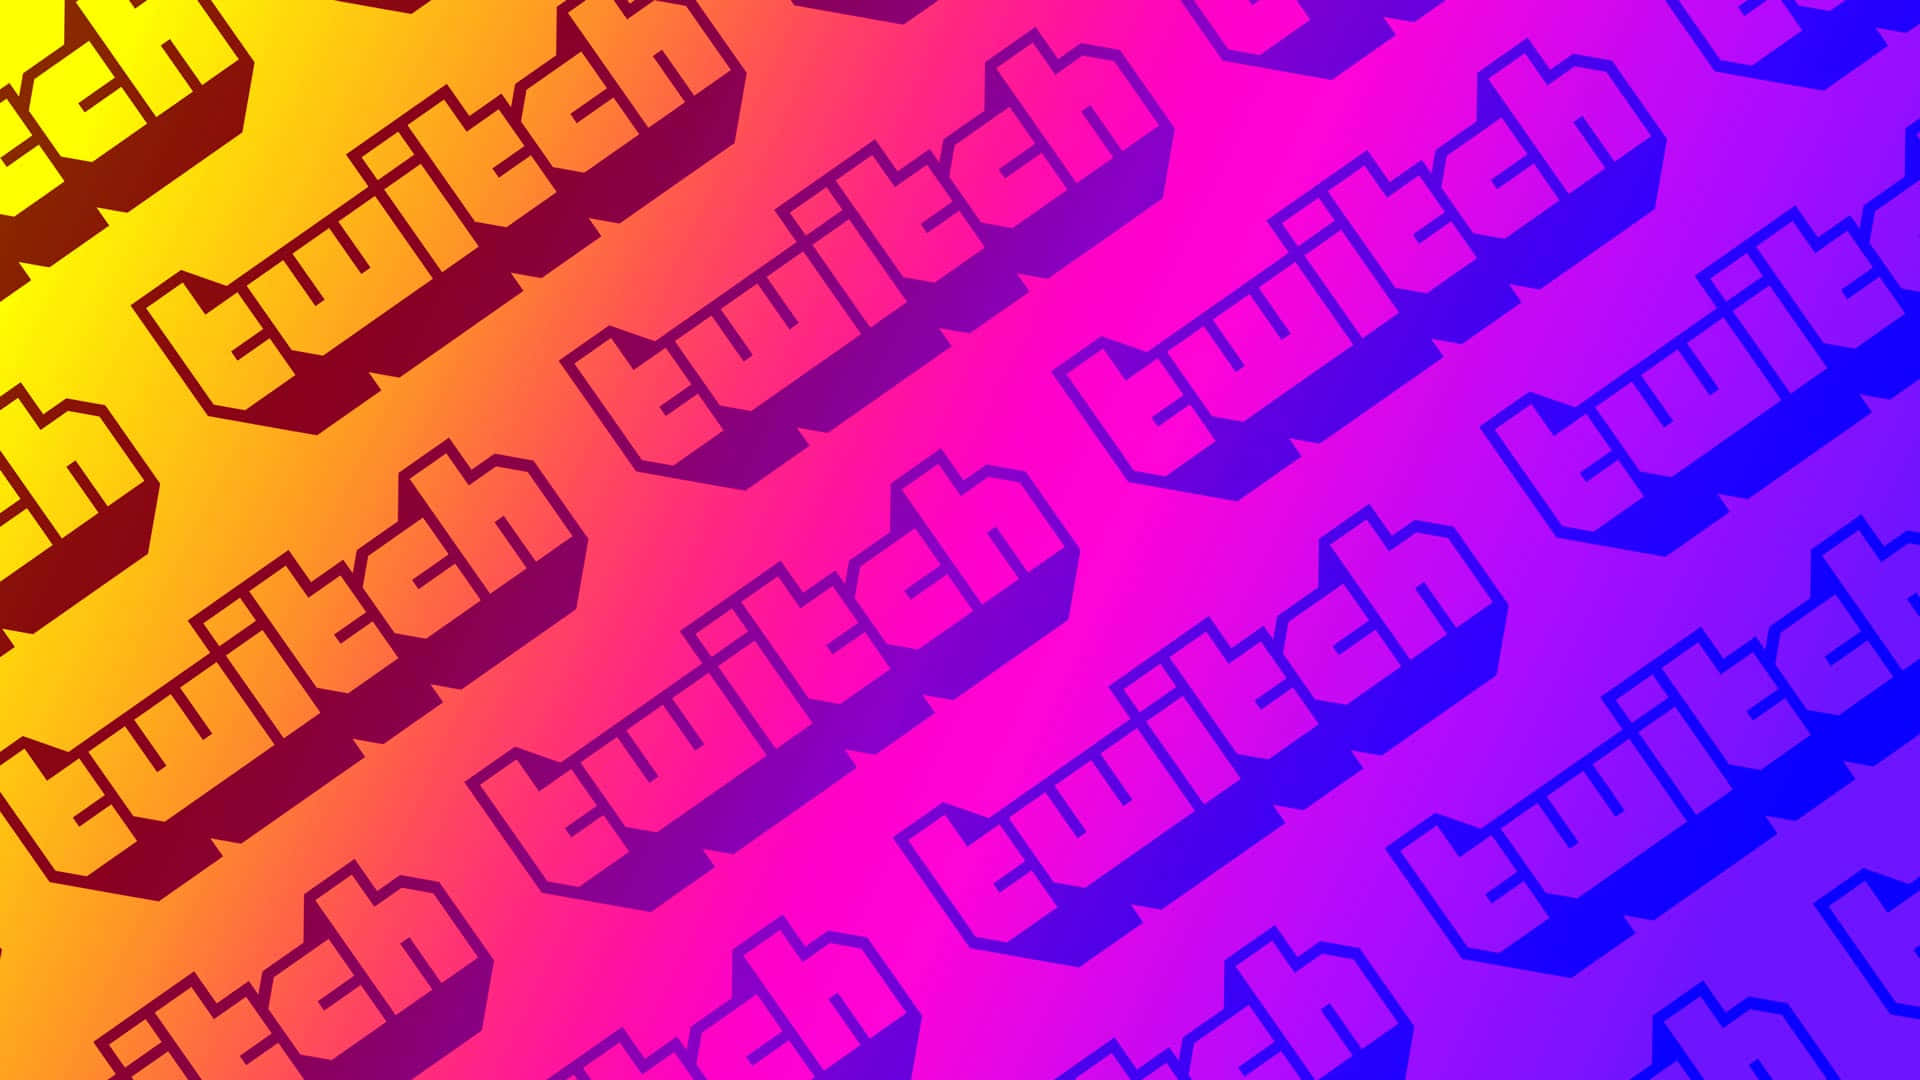 Live streaming your gaming entertainment on Twitch